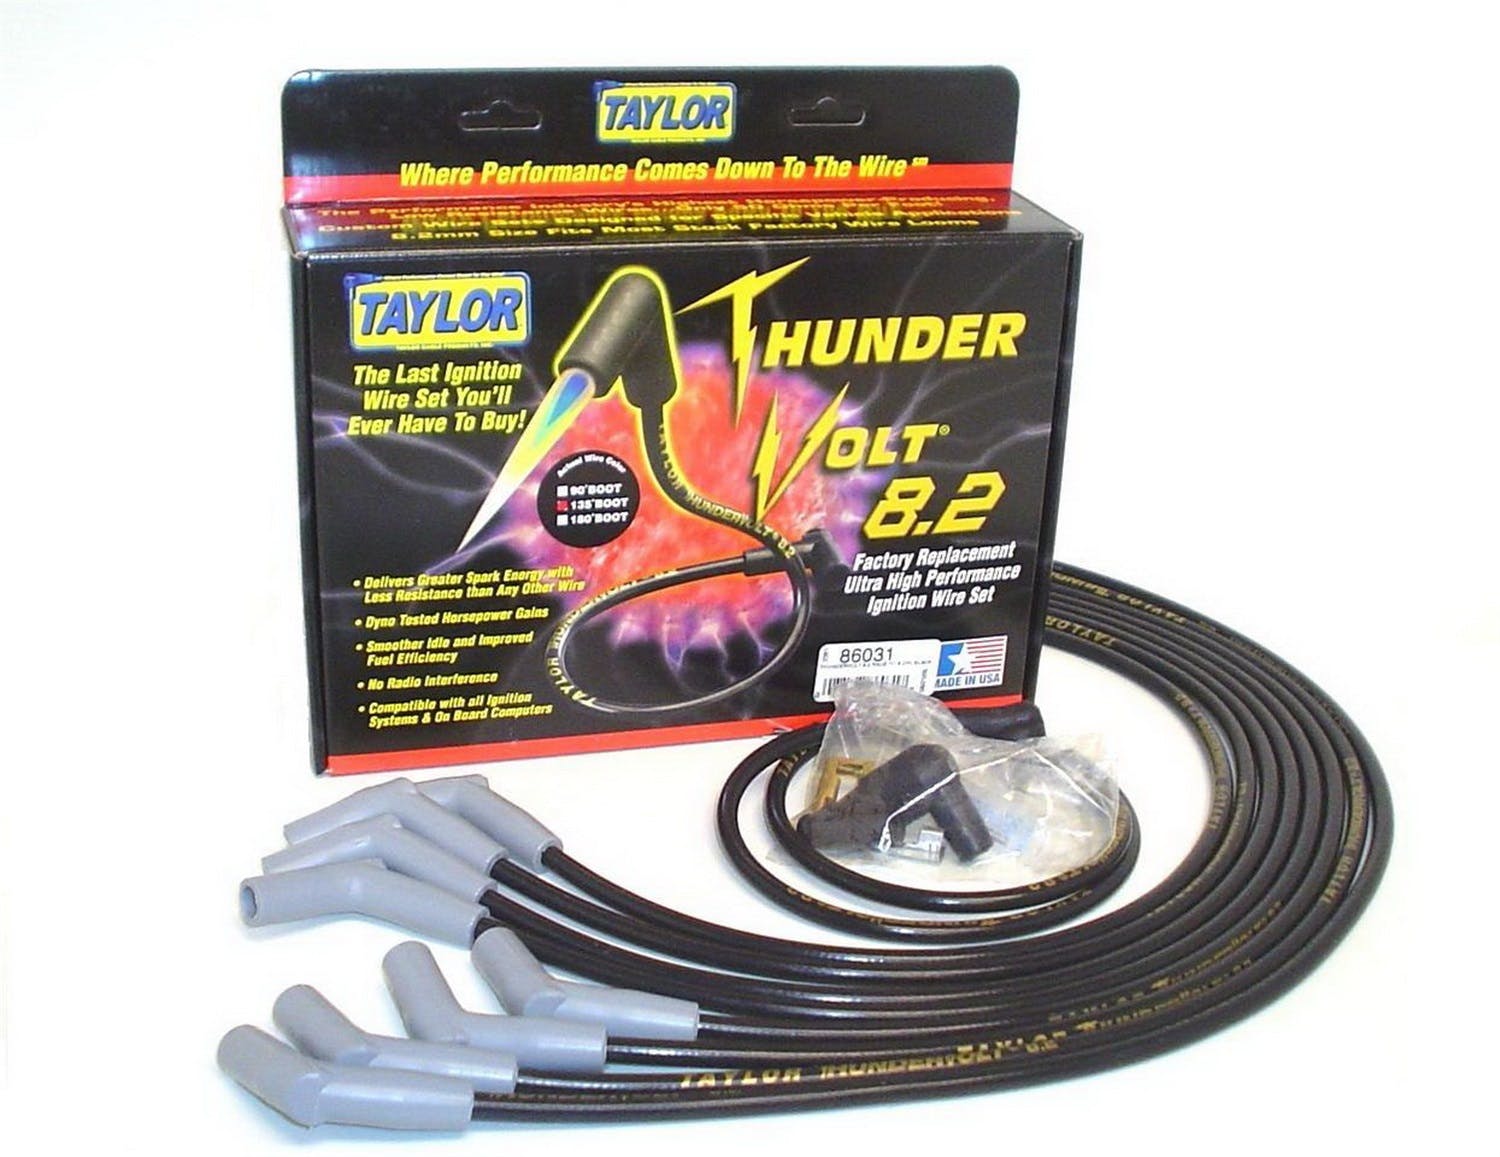 Taylor Cable Products 86031 Thundervolt 8.2 race fit 8 cyl black